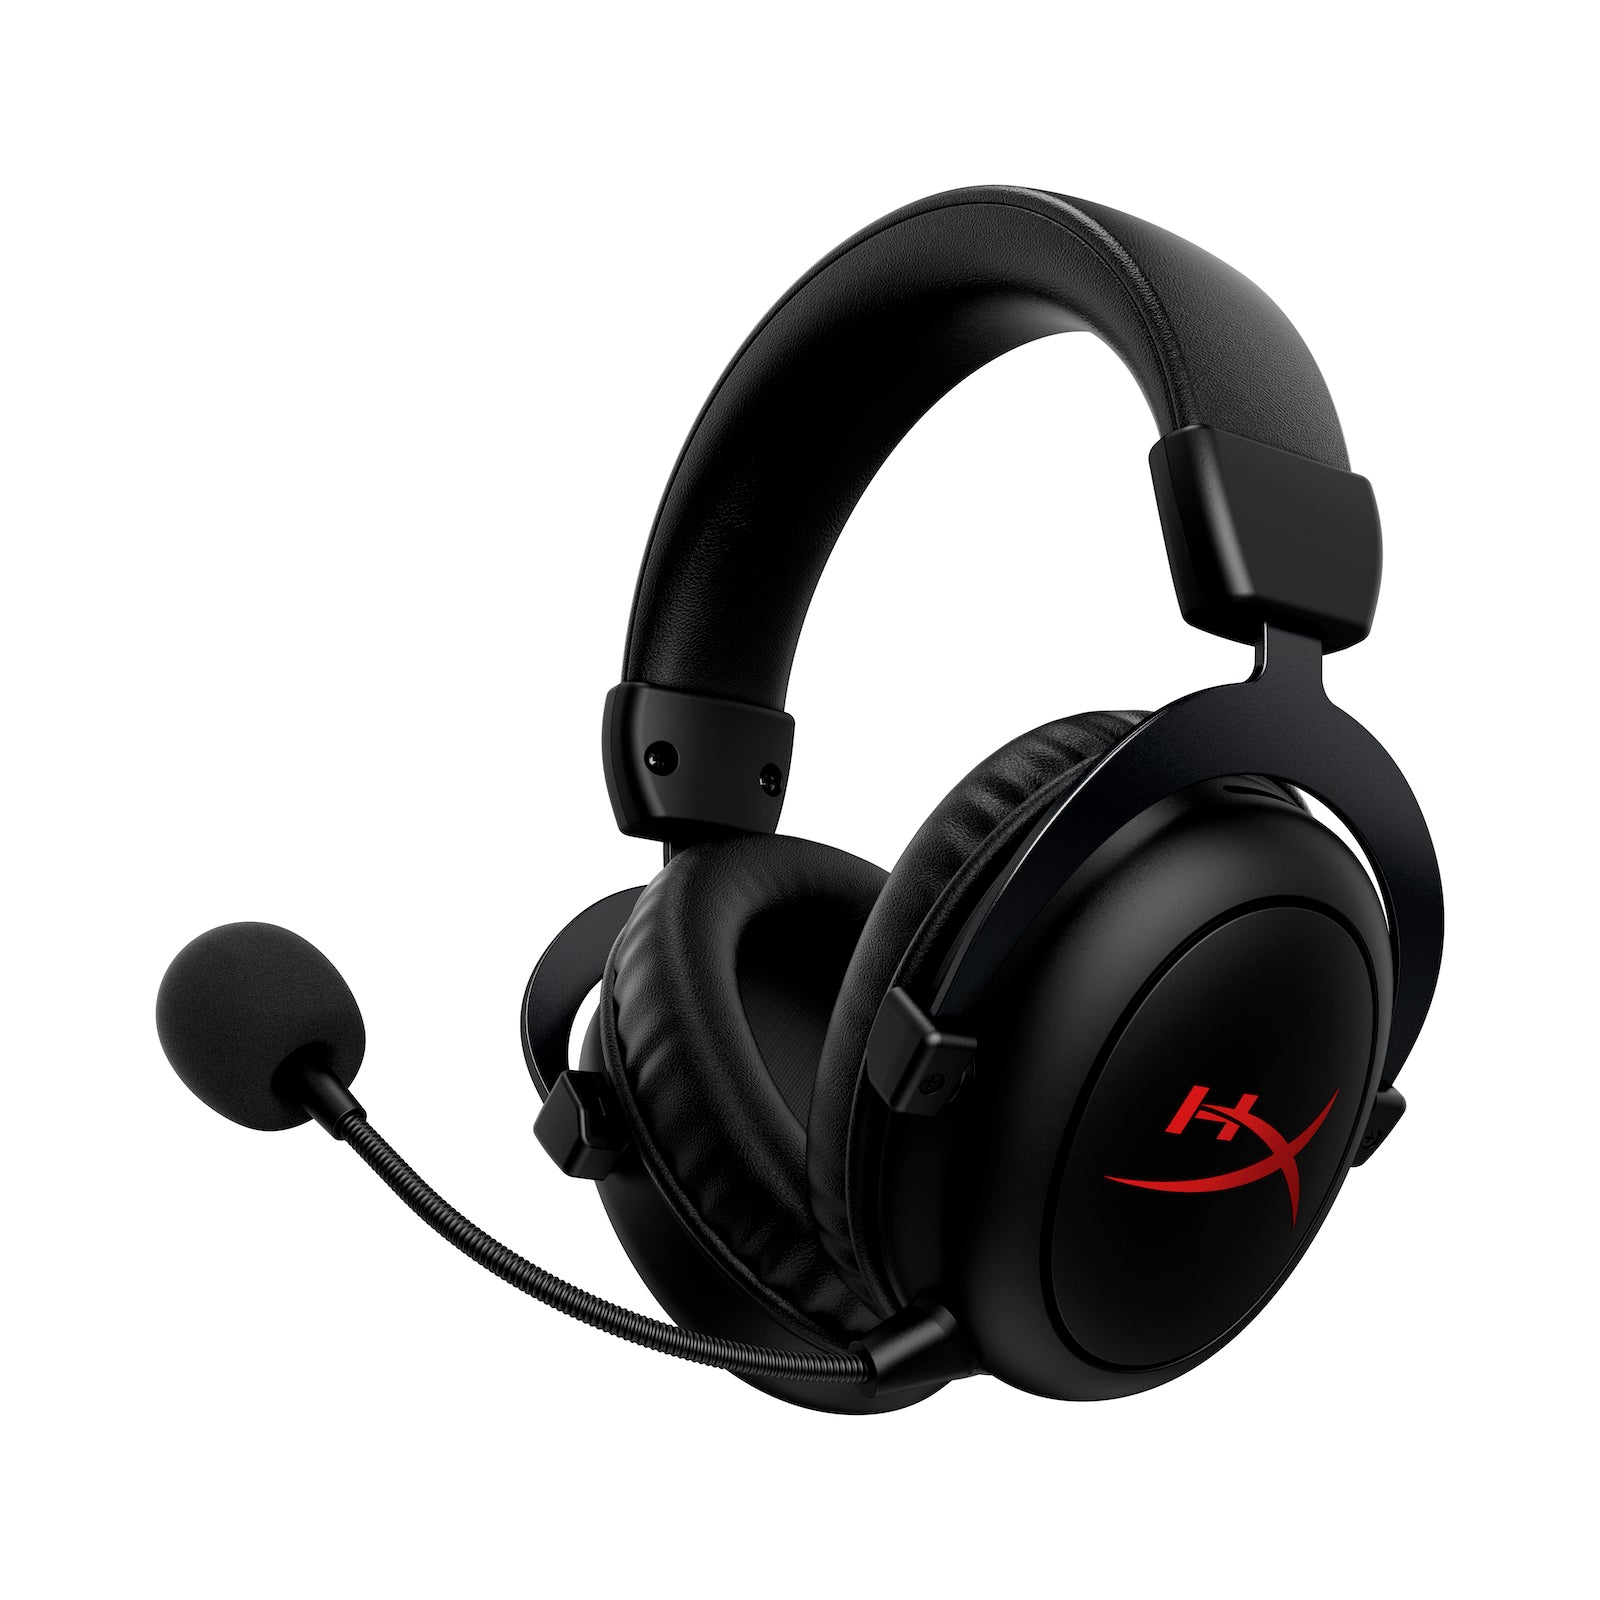 HyperX Cloud II Core Wireless Black Gaming Headset - main view pointing to the left side